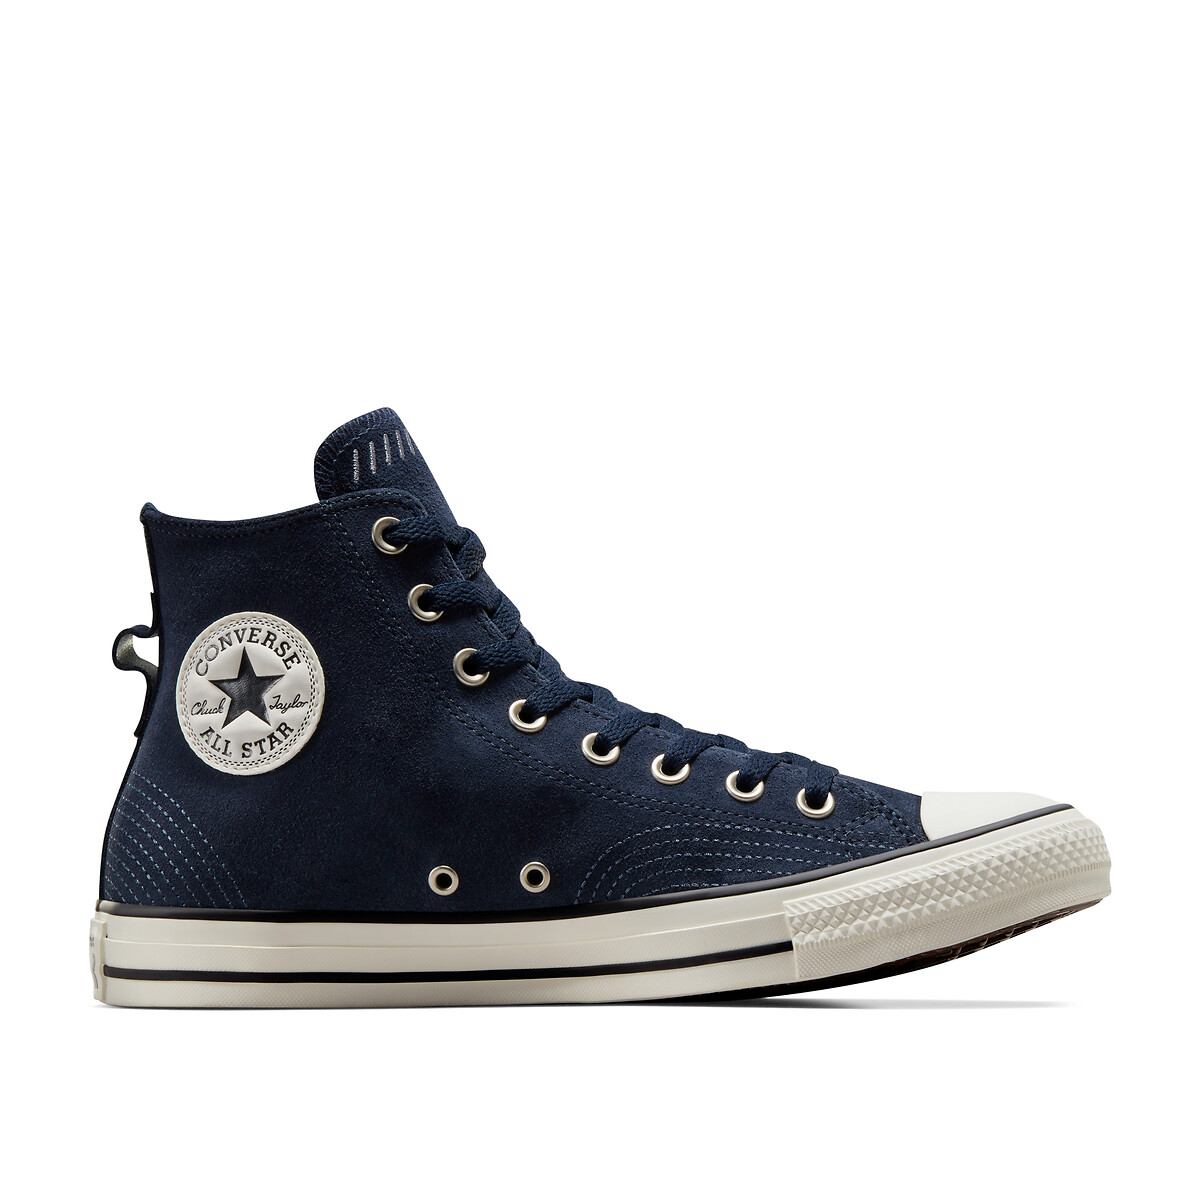 All Star Hi Artisanal Craft Suede High Top Trainers